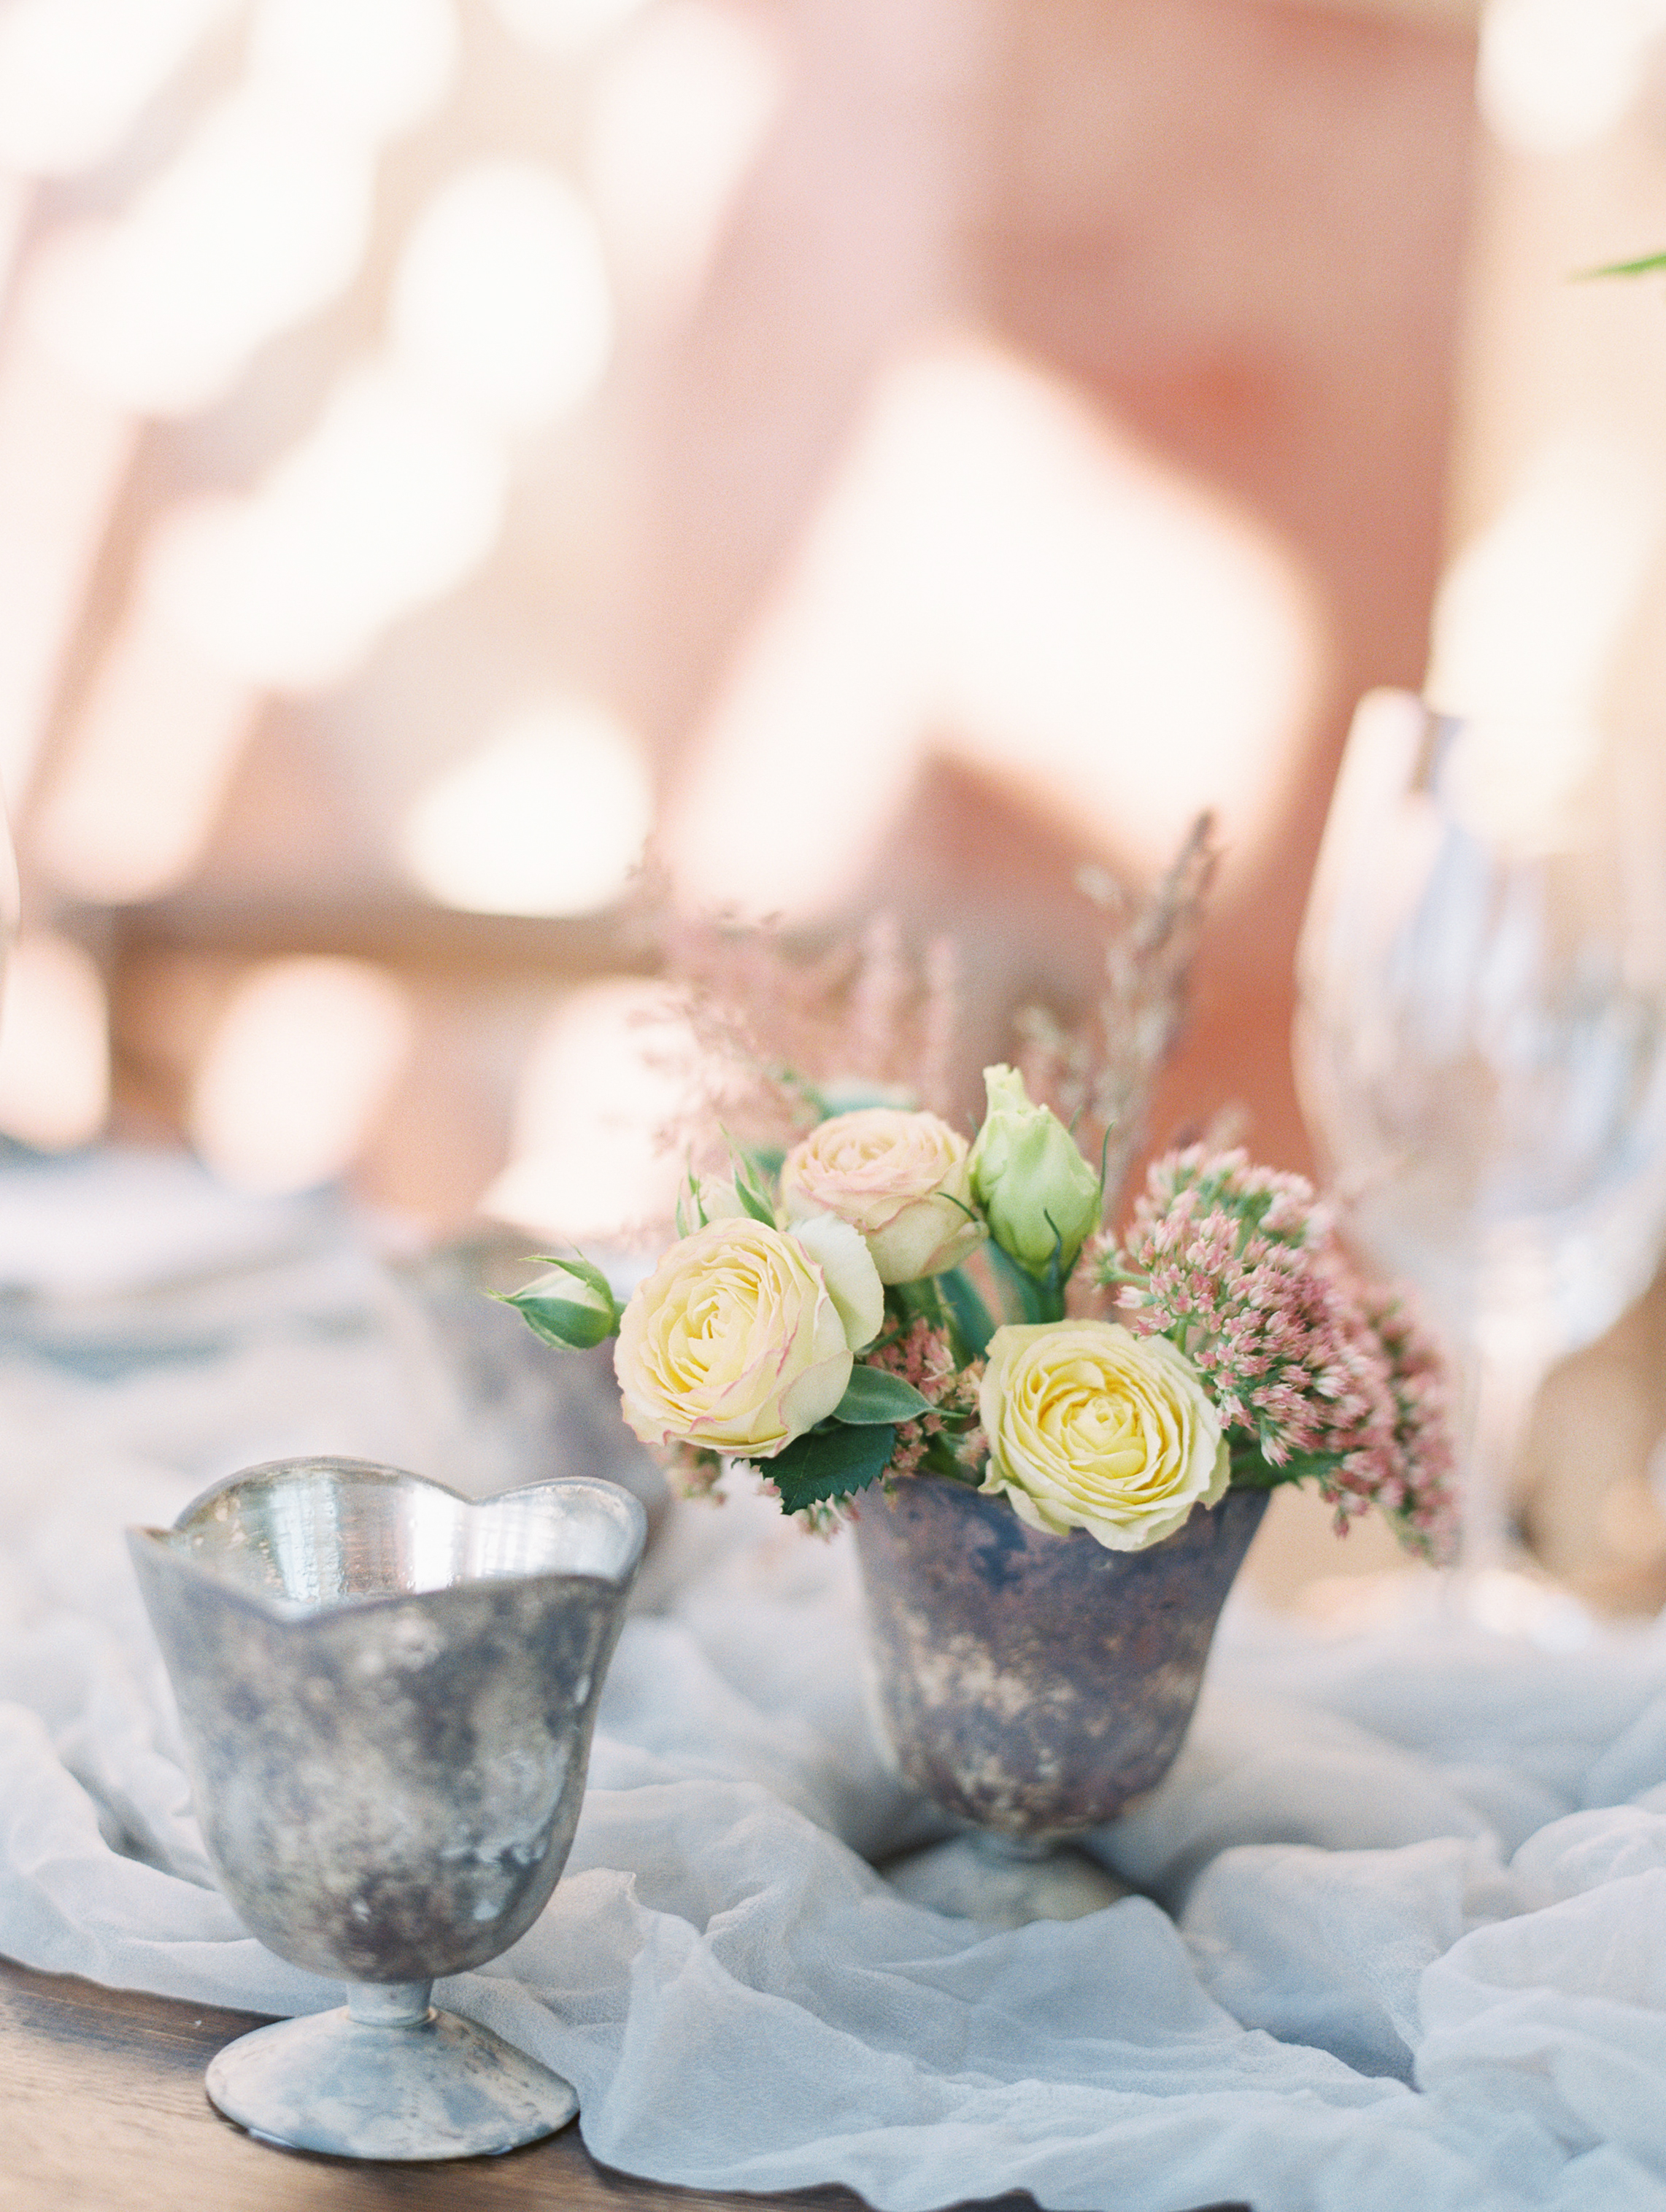 Michelle Leo Events | Utah Wedding and Event Design and Planning